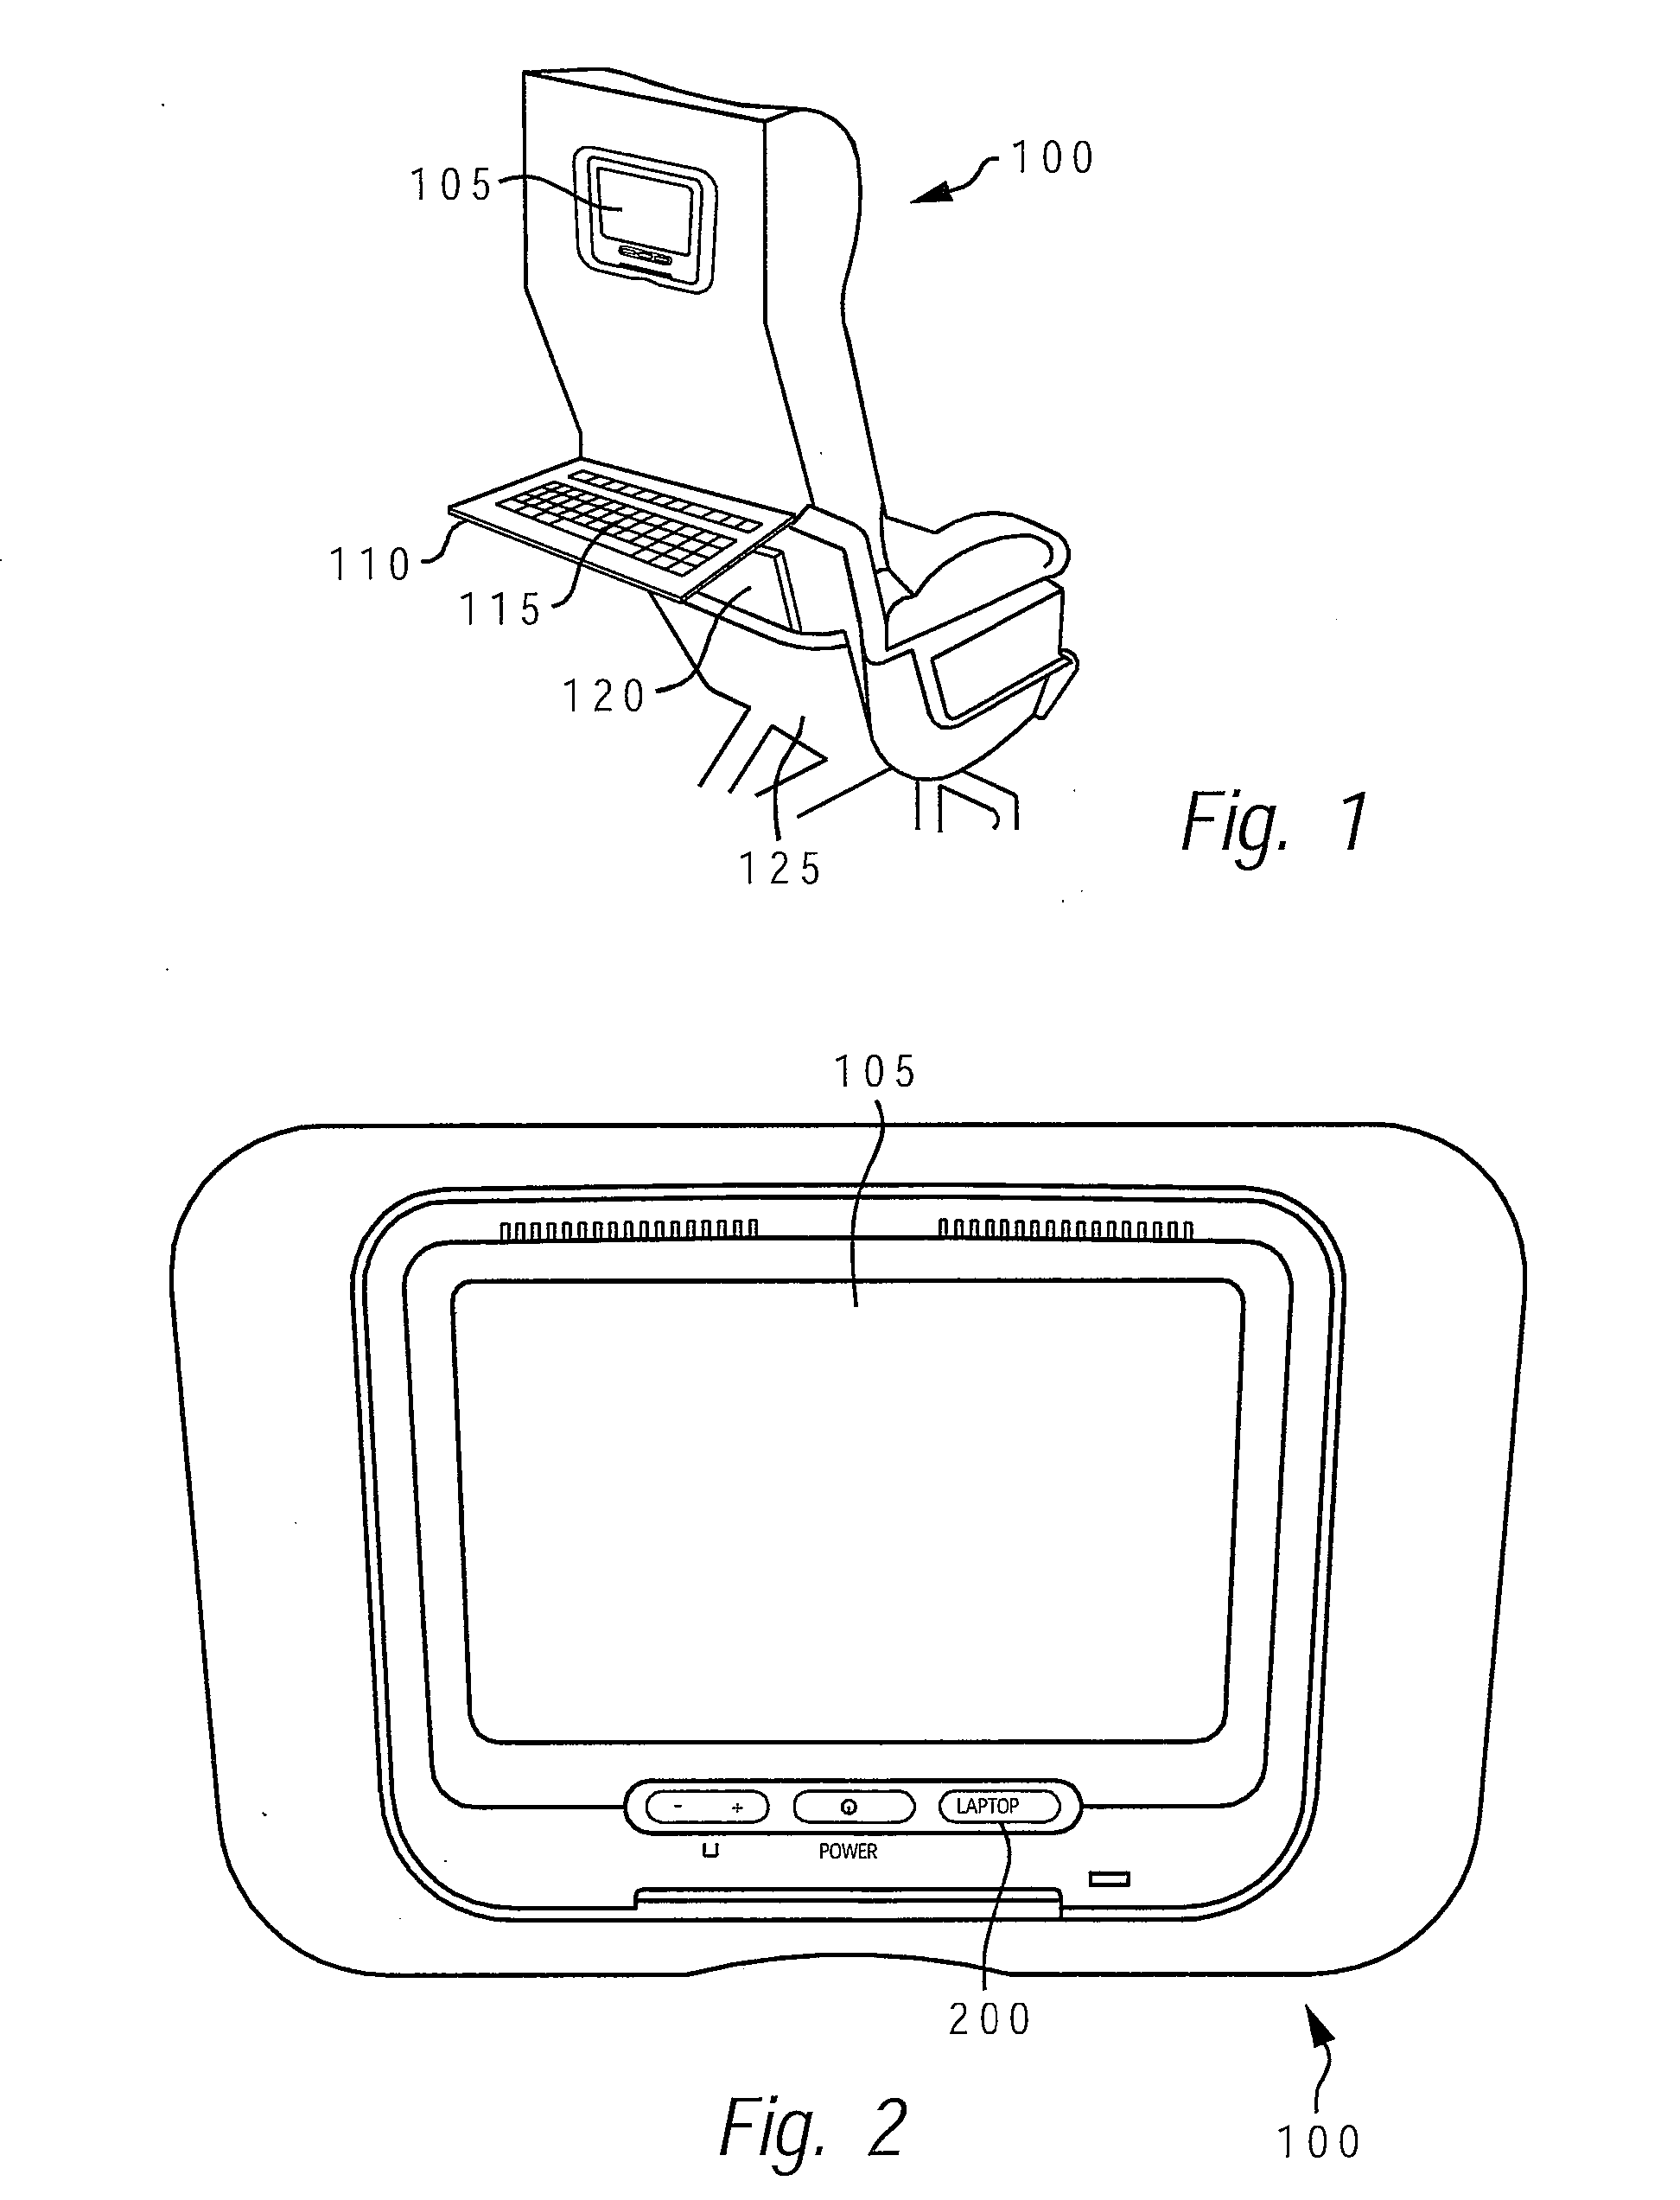 Airplane passenger seats with embedded displays and other I/O components for interfacing with passenger laptop computers